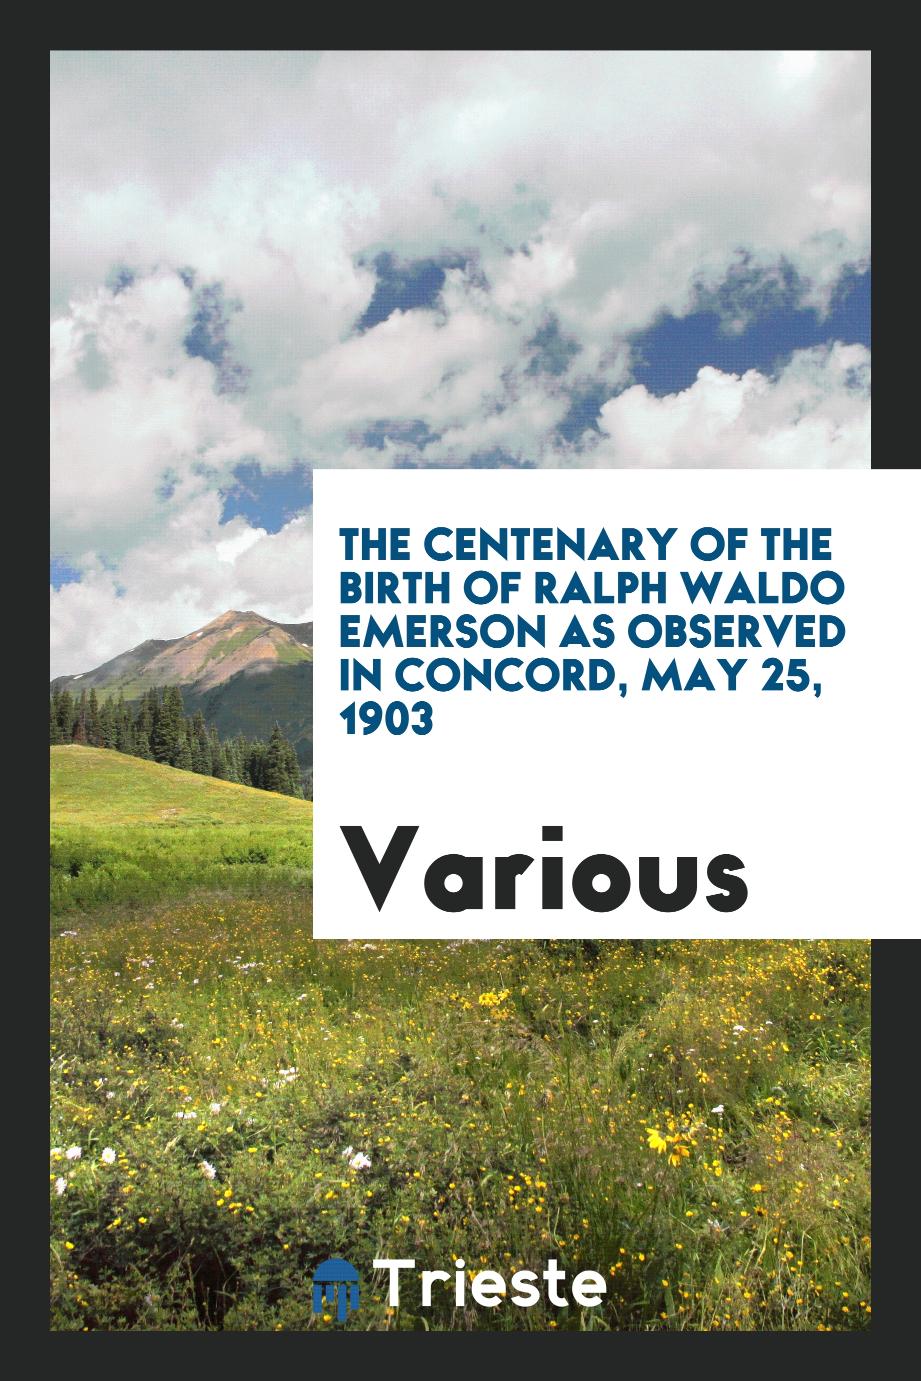 The Centenary of the Birth of Ralph Waldo Emerson as Observed in Concord, May 25, 1903